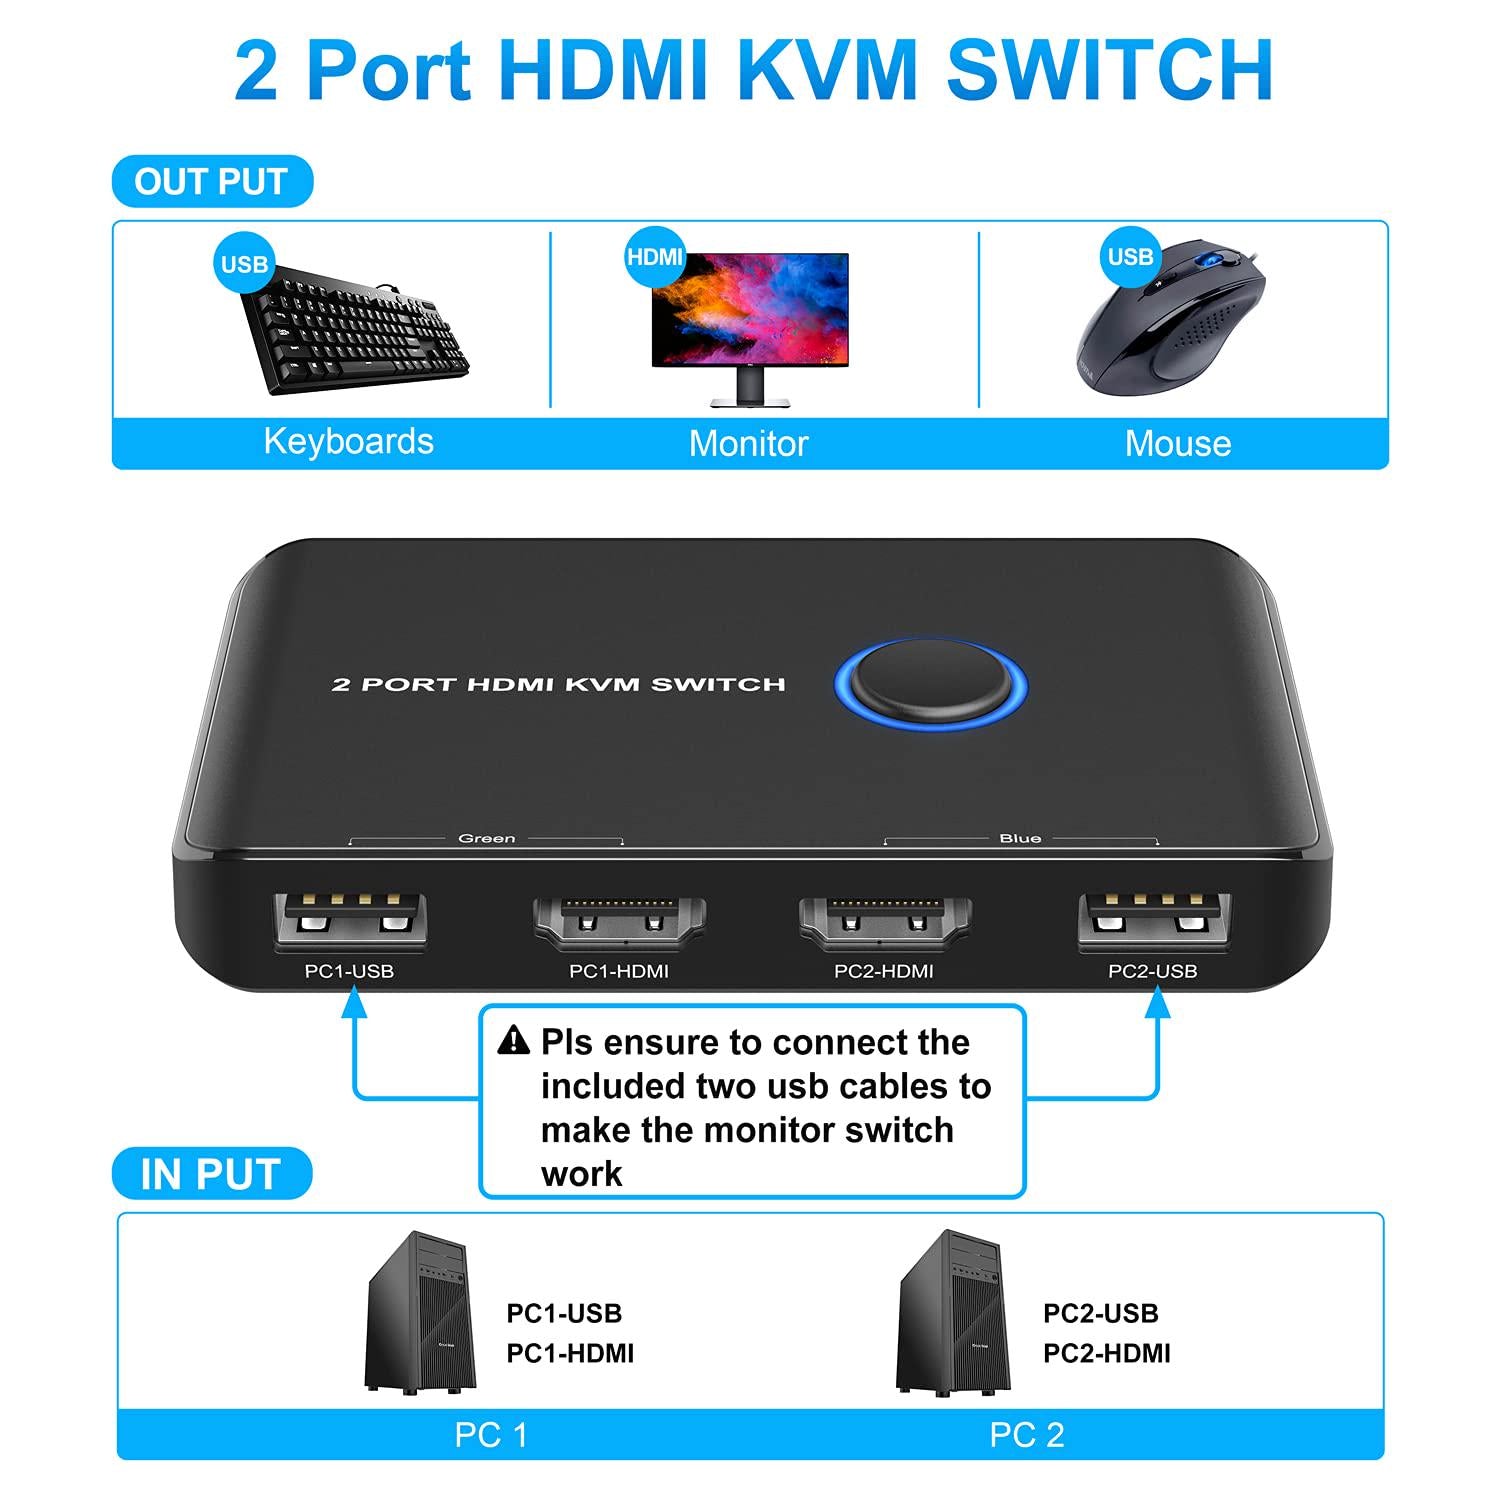 ABLEWE, KVM Switch HDMI 2 Port Box,ABLEWE USB and HDMI Switch for 2 Computers Share Keyboard Mouse Printer and one HD Monitor,Support UHD 4K@60Hz,with 2 USB Cable and 2 HDMI Cable